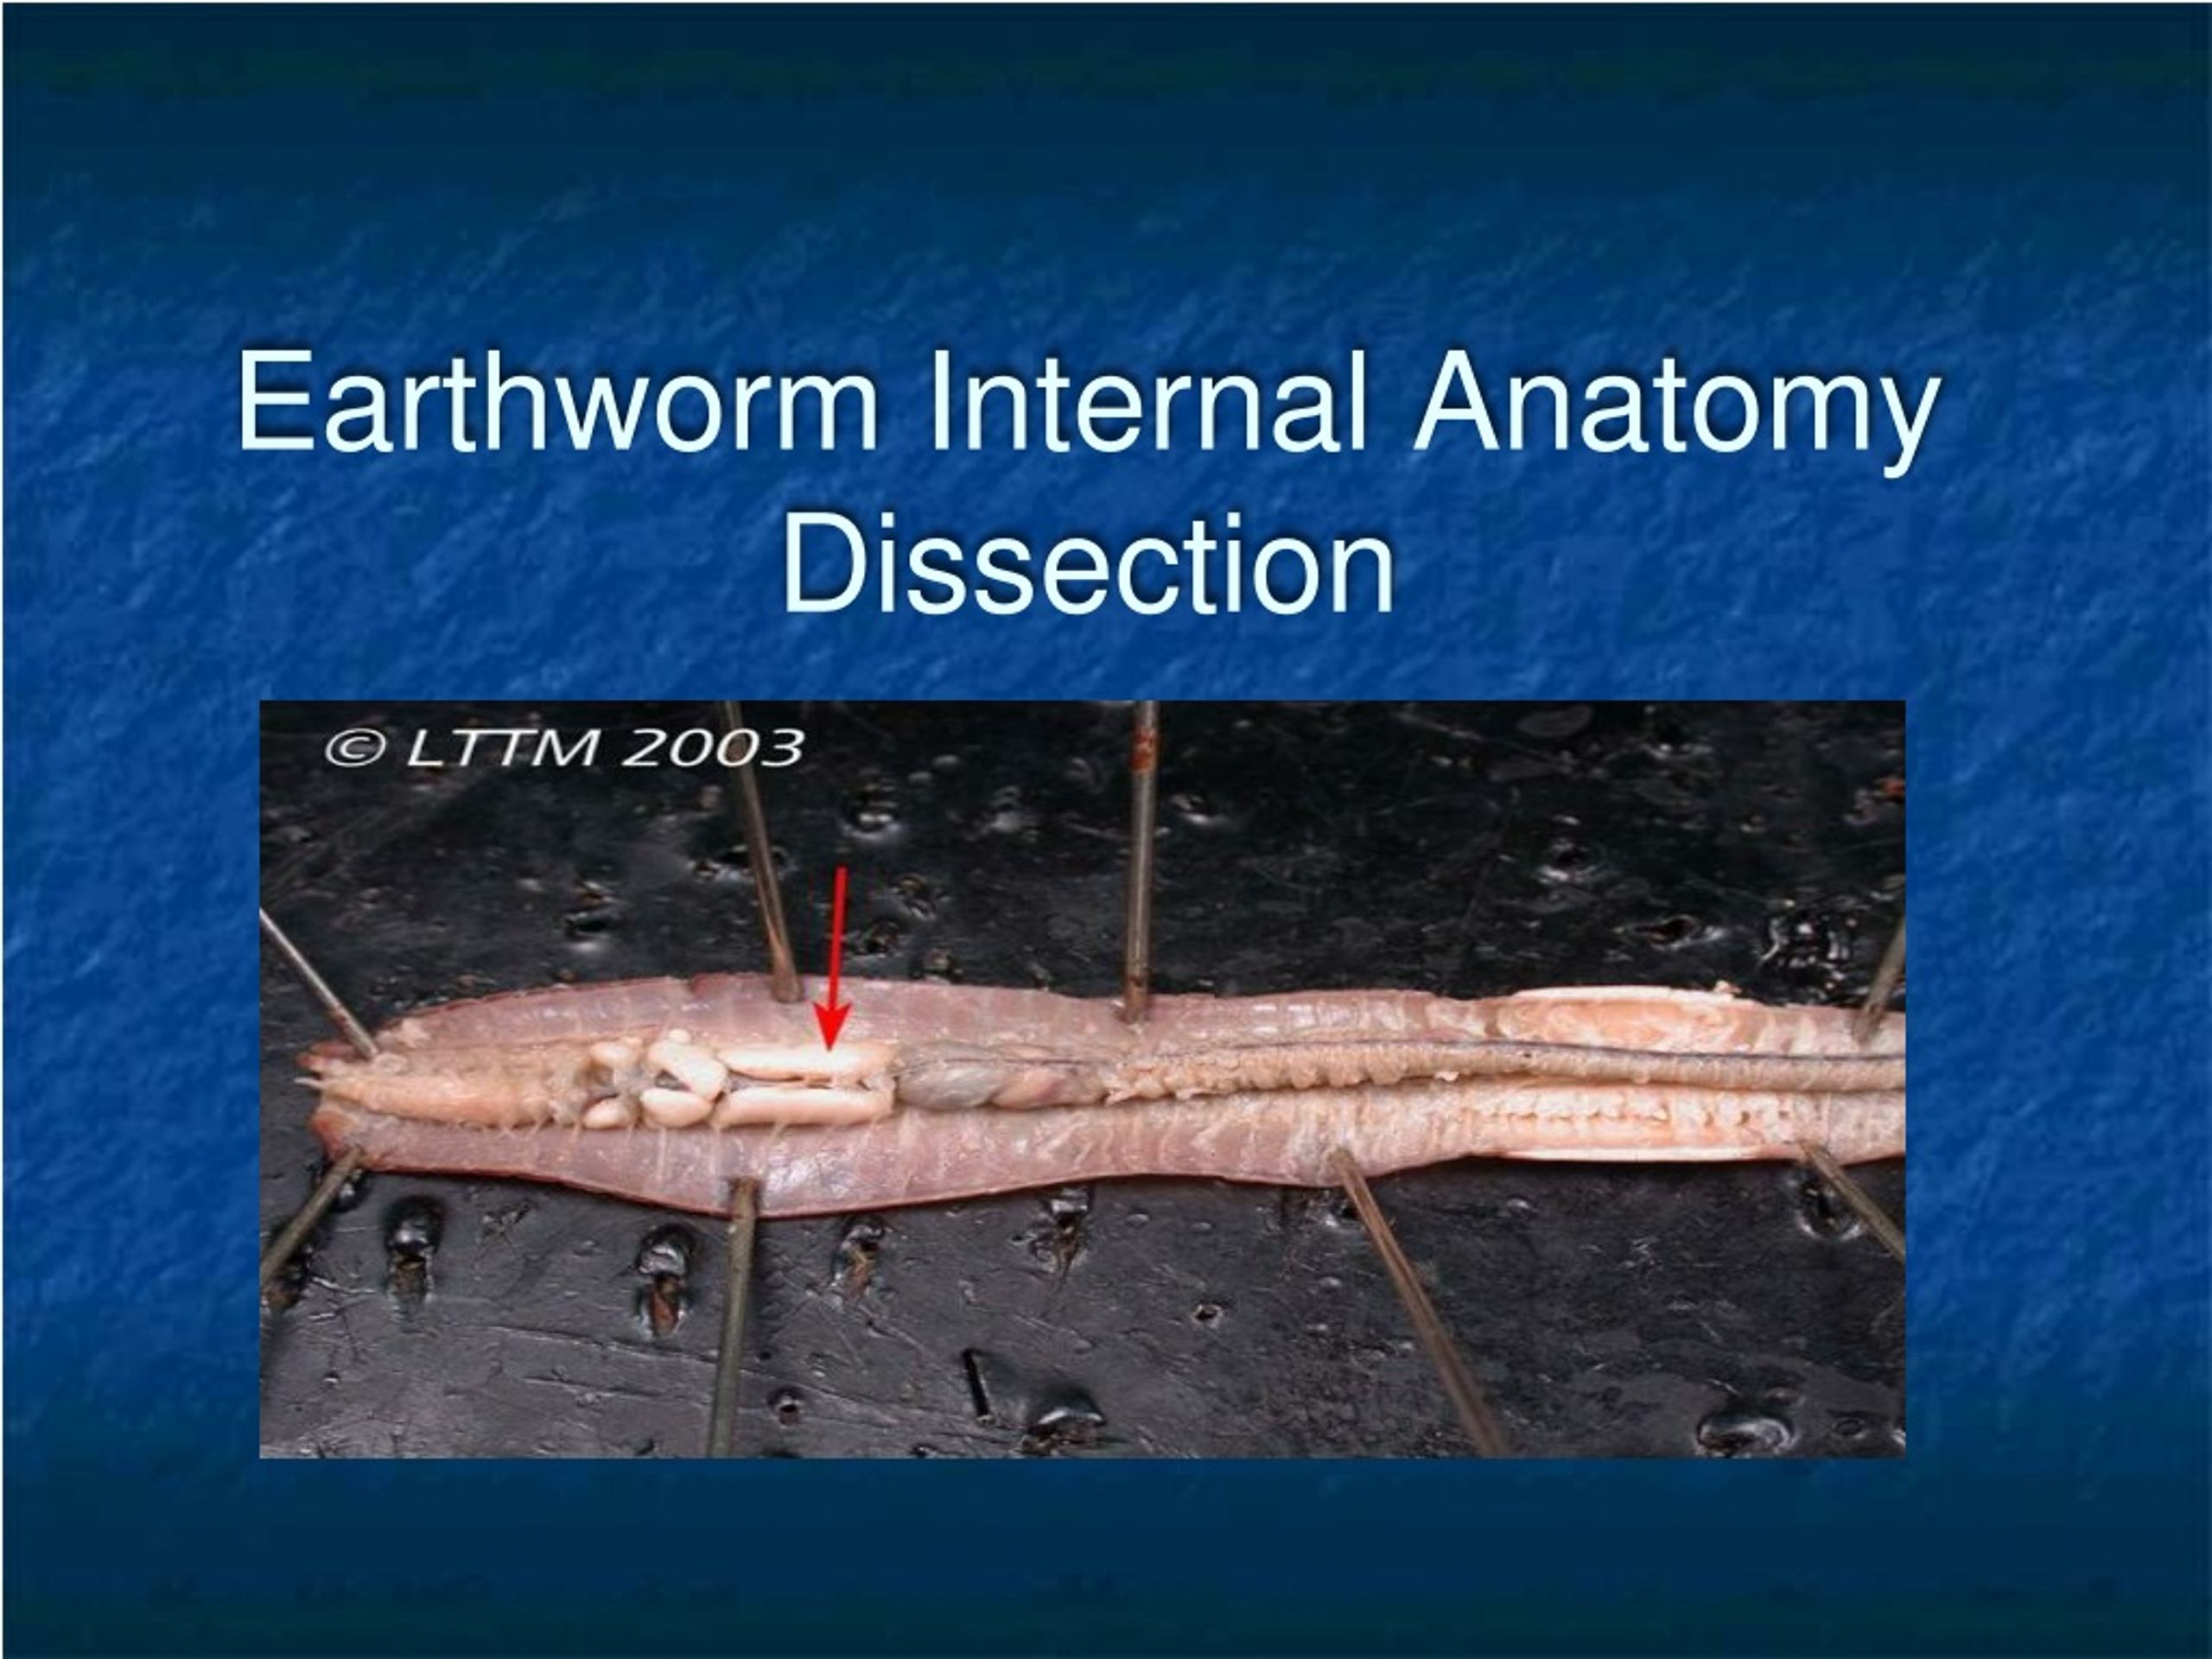 PPT - Earthworm Internal Anatomy Dissection PowerPoint